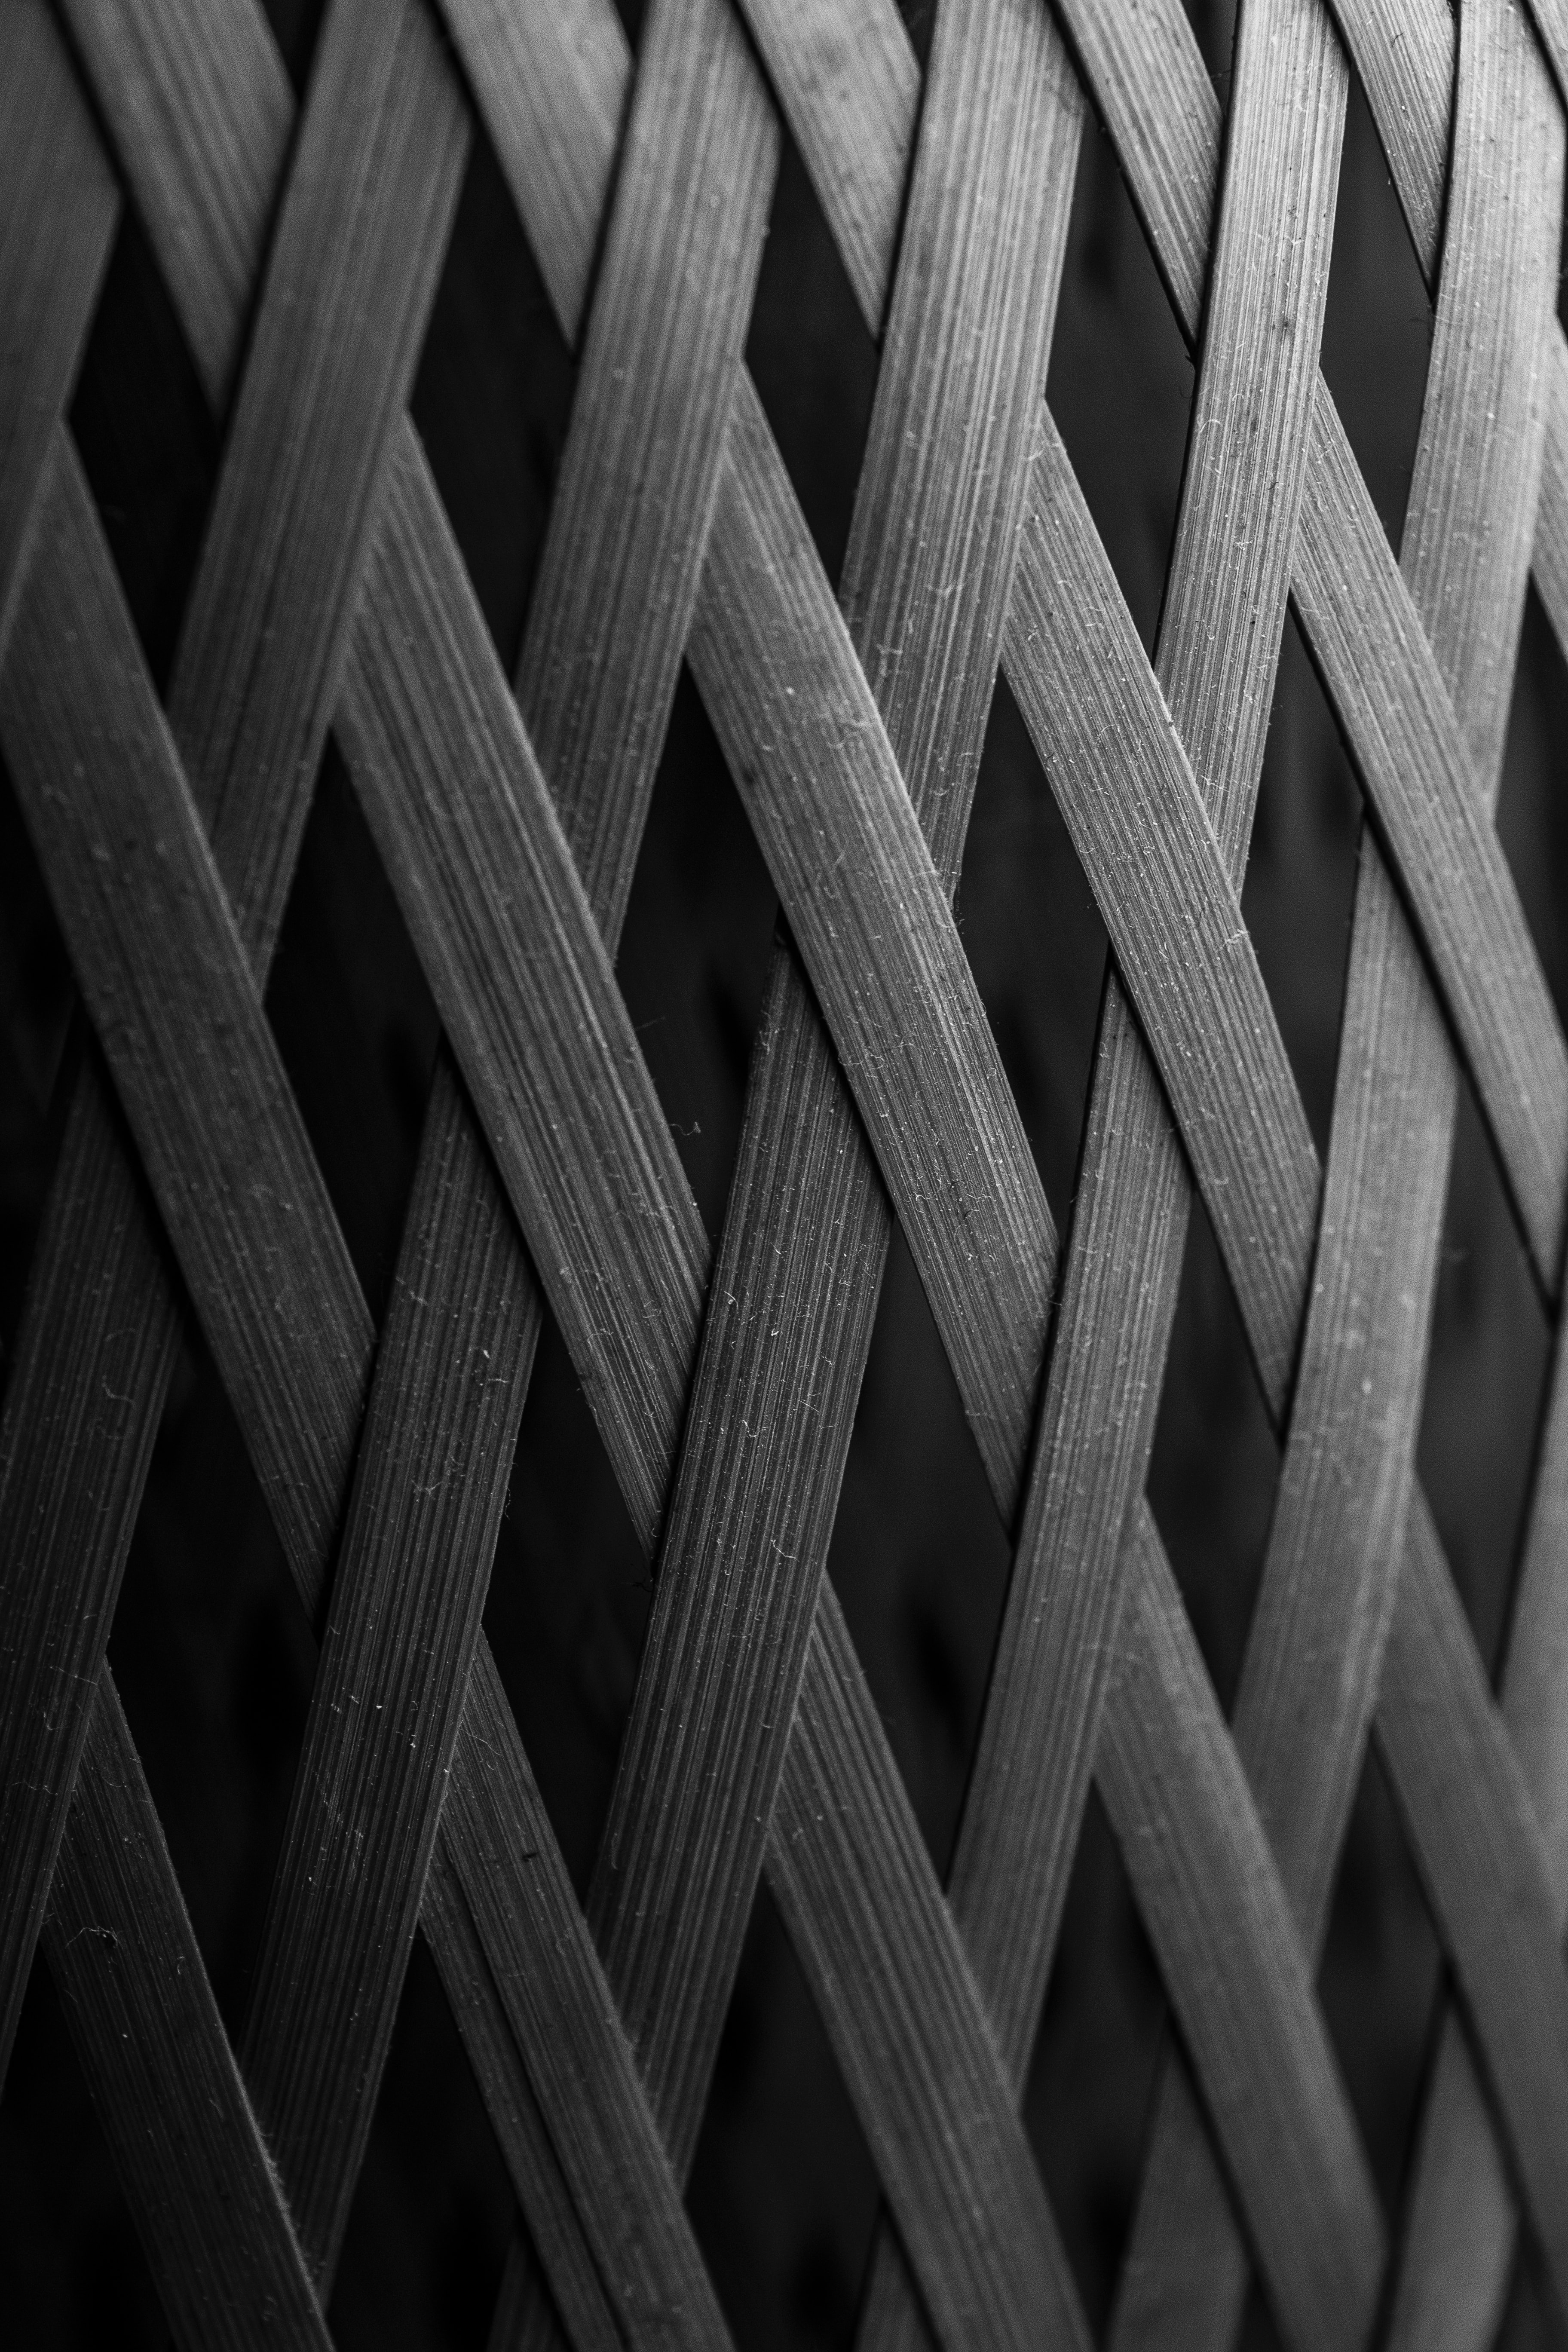 facade, wooden, chb, texture, wood, textures, fence, bw wallpaper for mobile